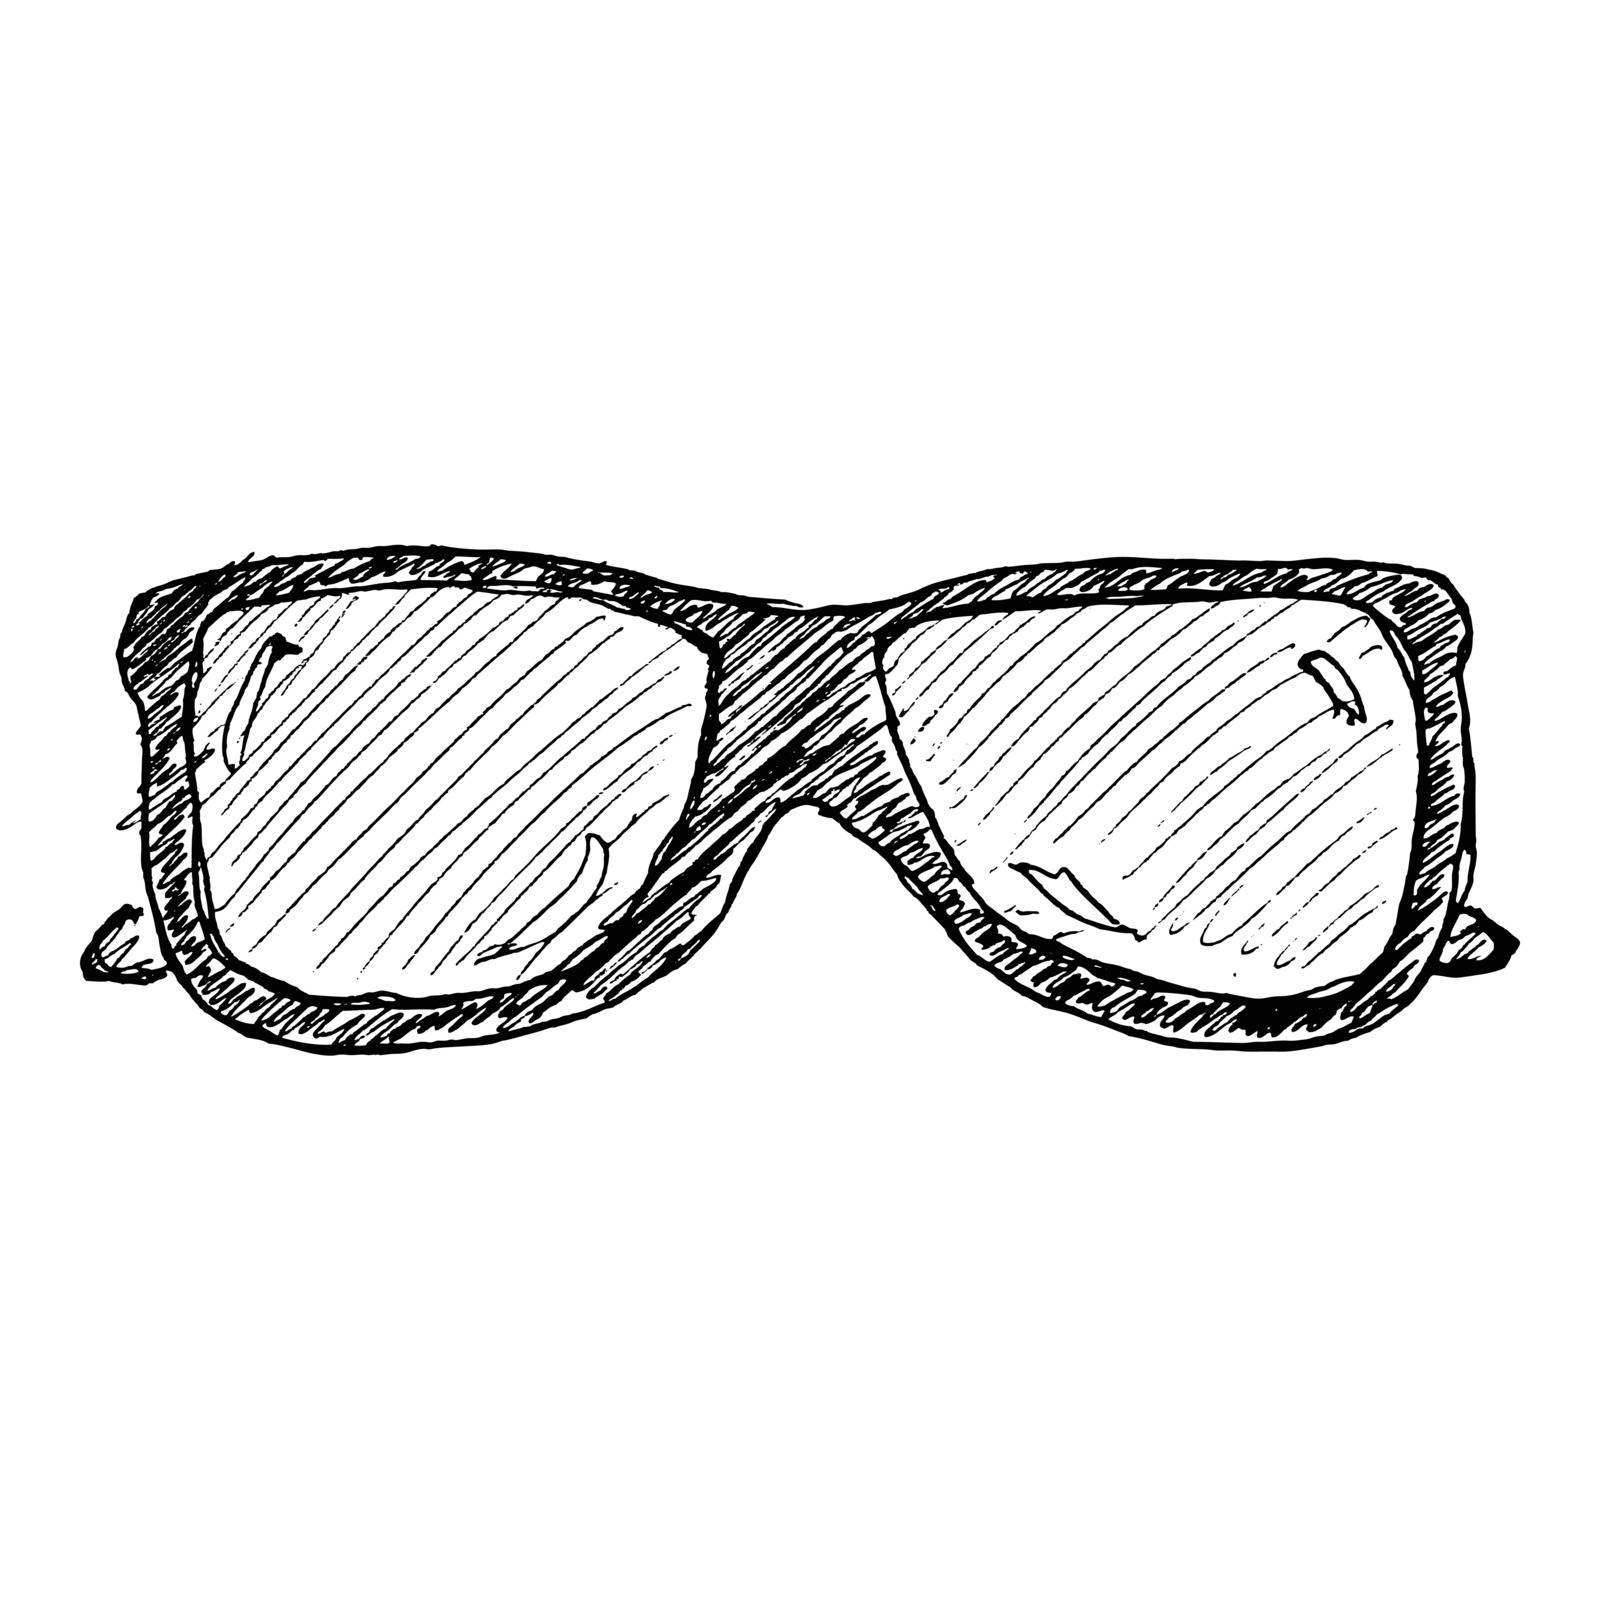 illustration of a pair of sunglasses by christopherhall